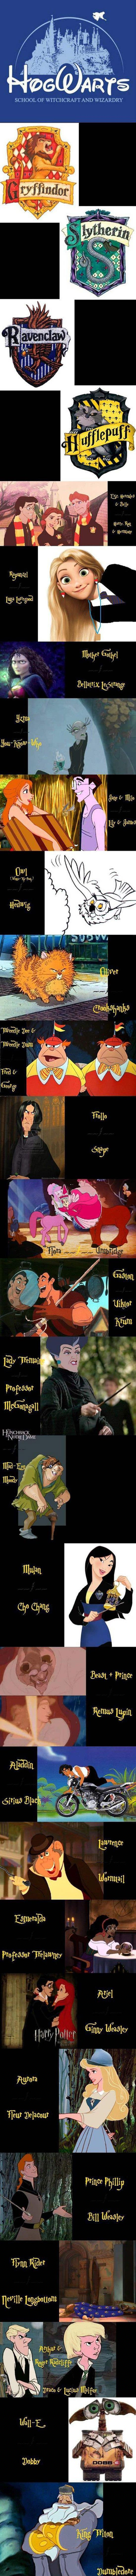 If Harry Potter Was Made By Disney... -   Misc